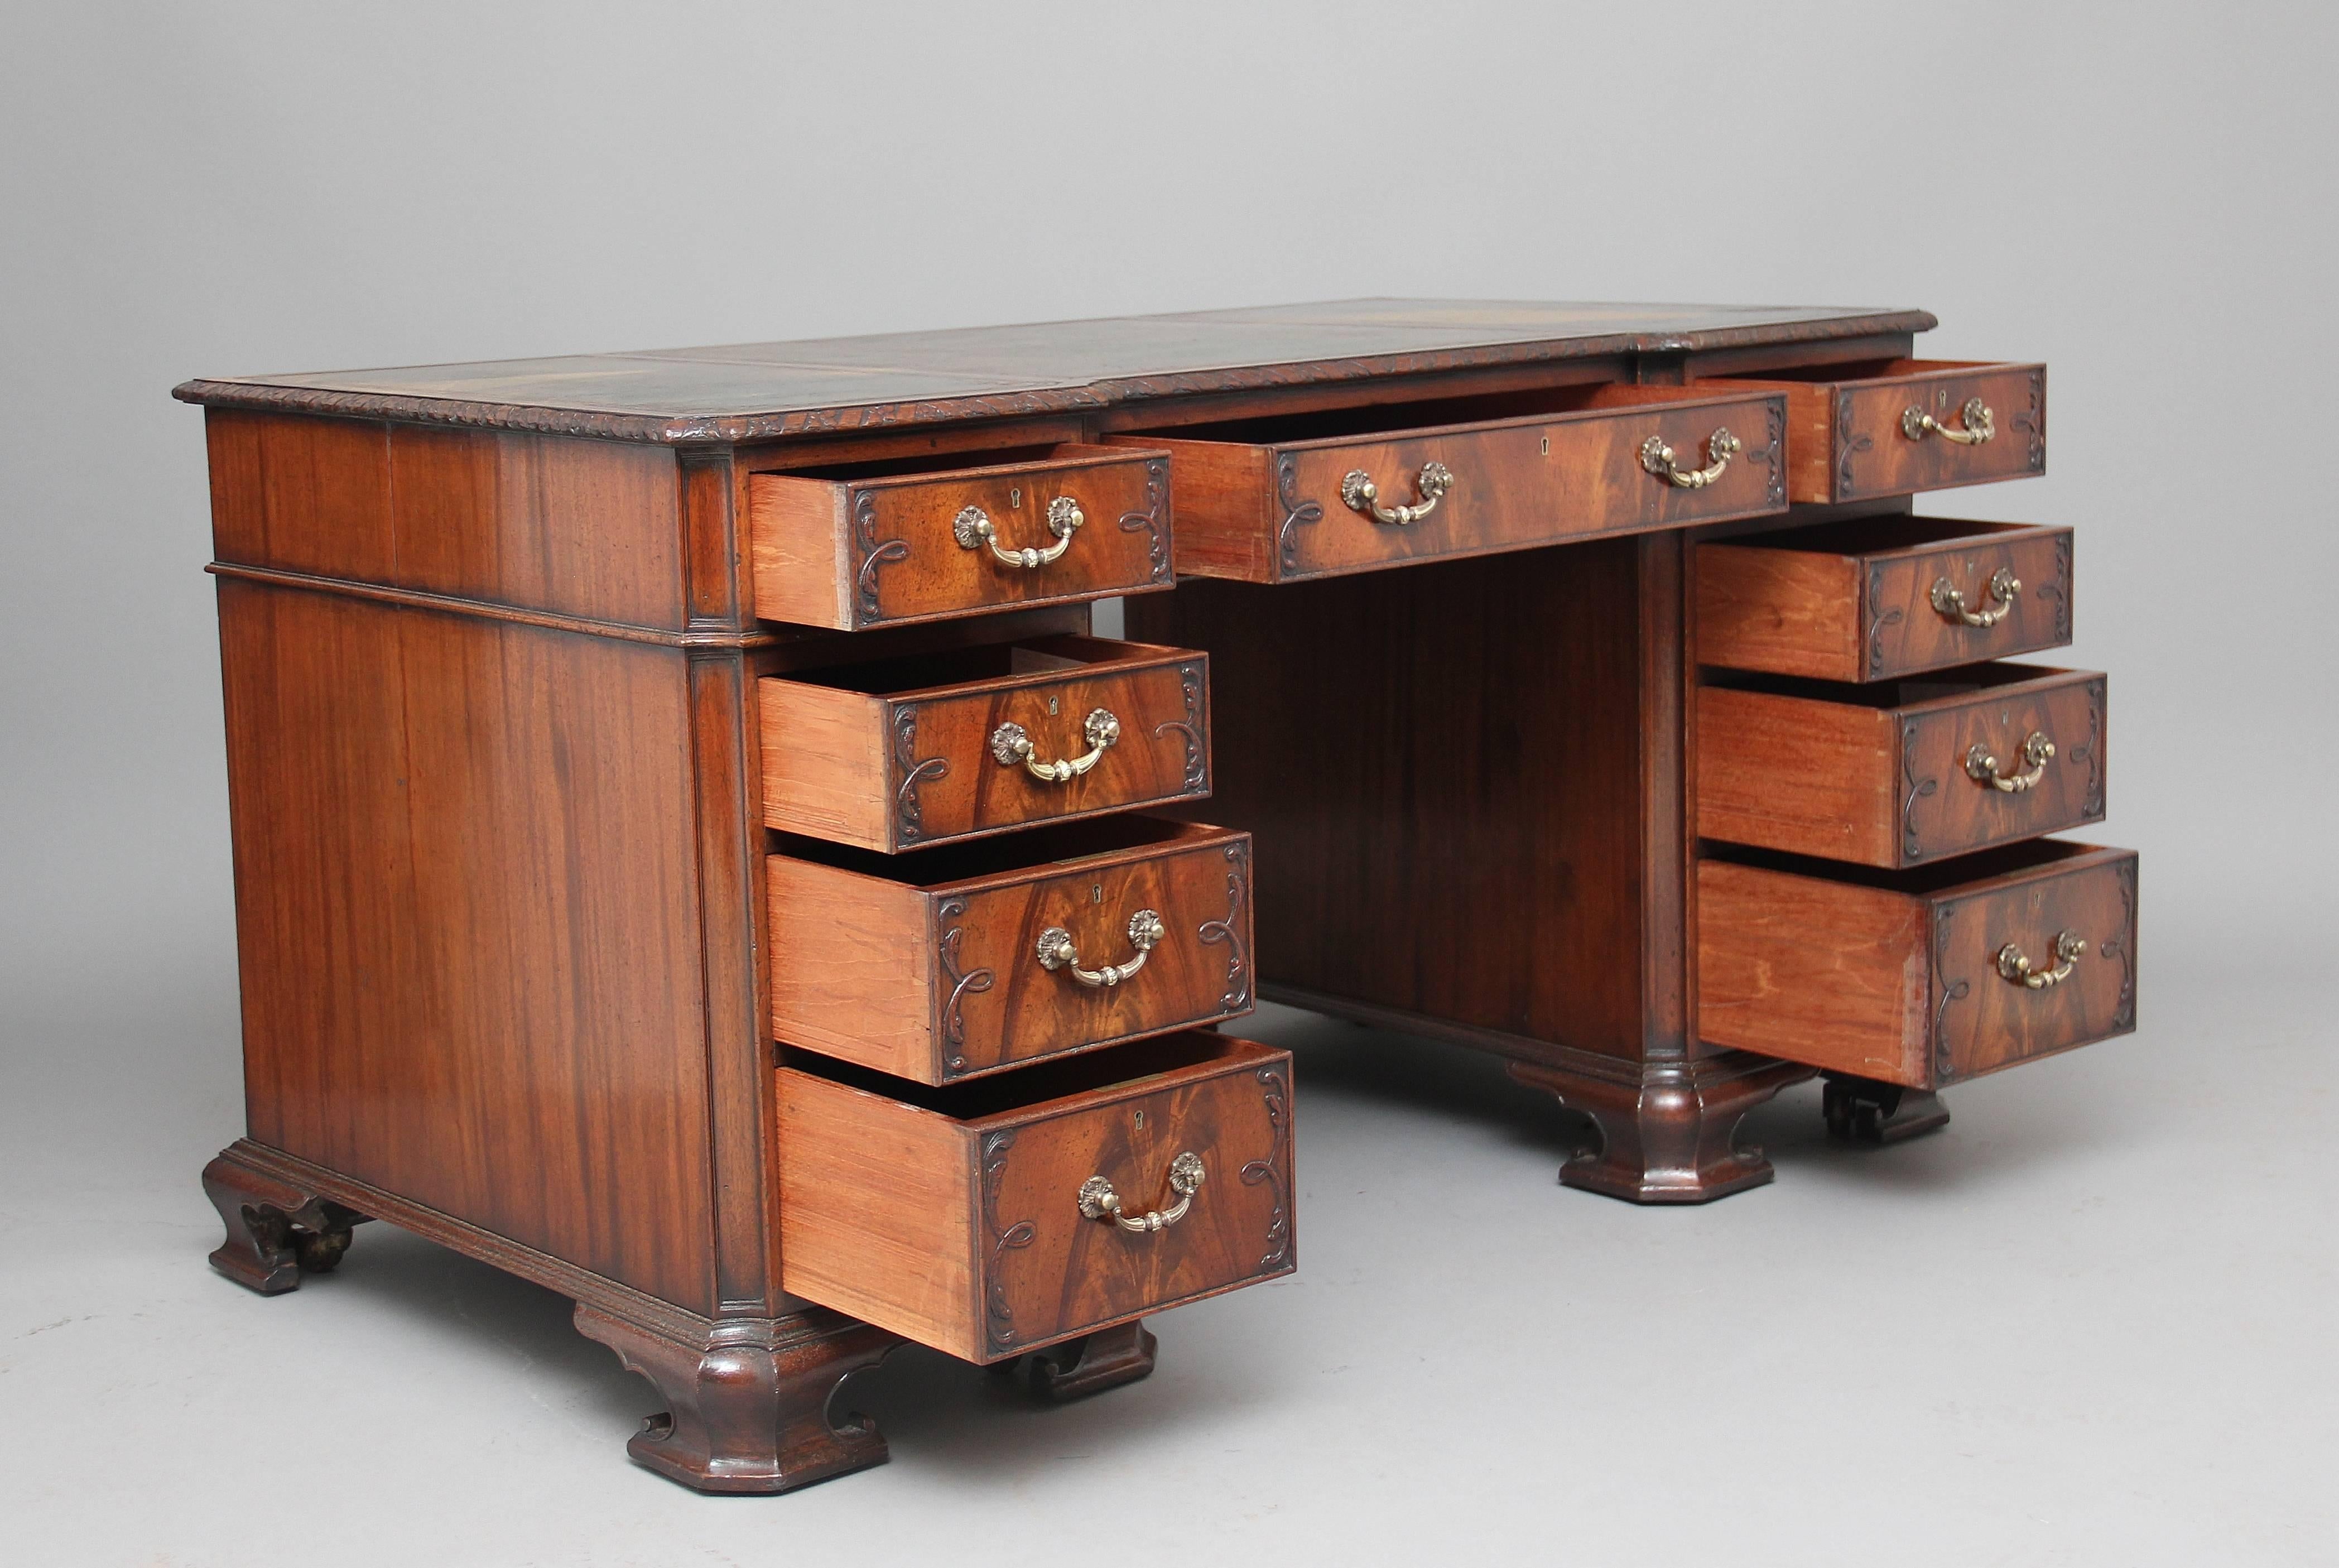 European Early 20th Century Edwardian Chippendale Influenced Mahogany Desk